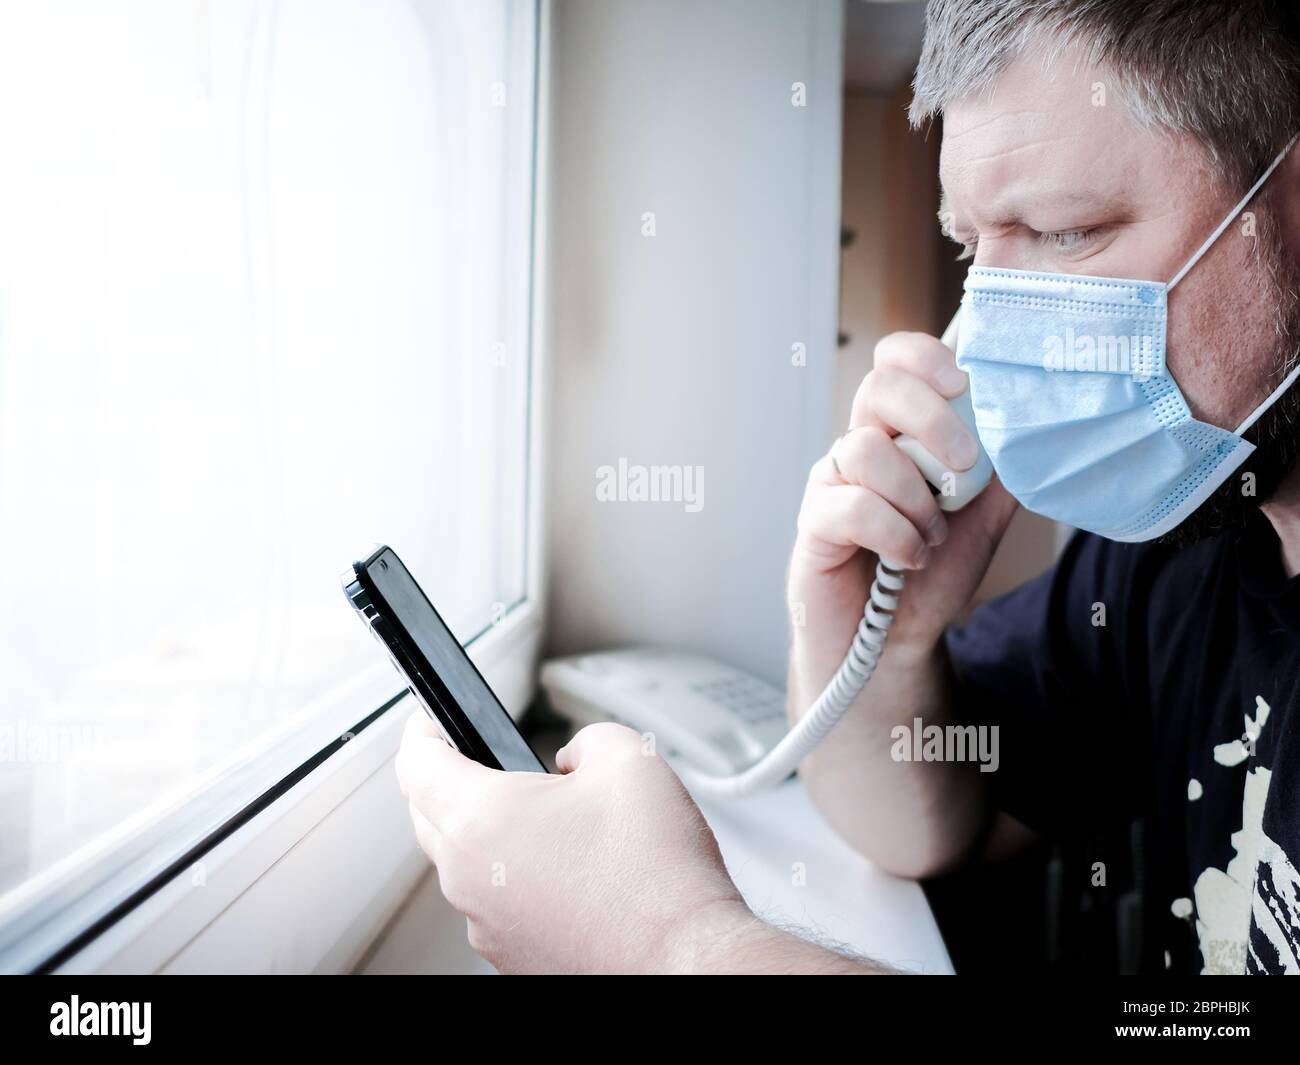 A man in a medical mask sits in front of a window and talks on a landline phone, holding a smartphone in his hand. He worries about family health duri Stock Photo